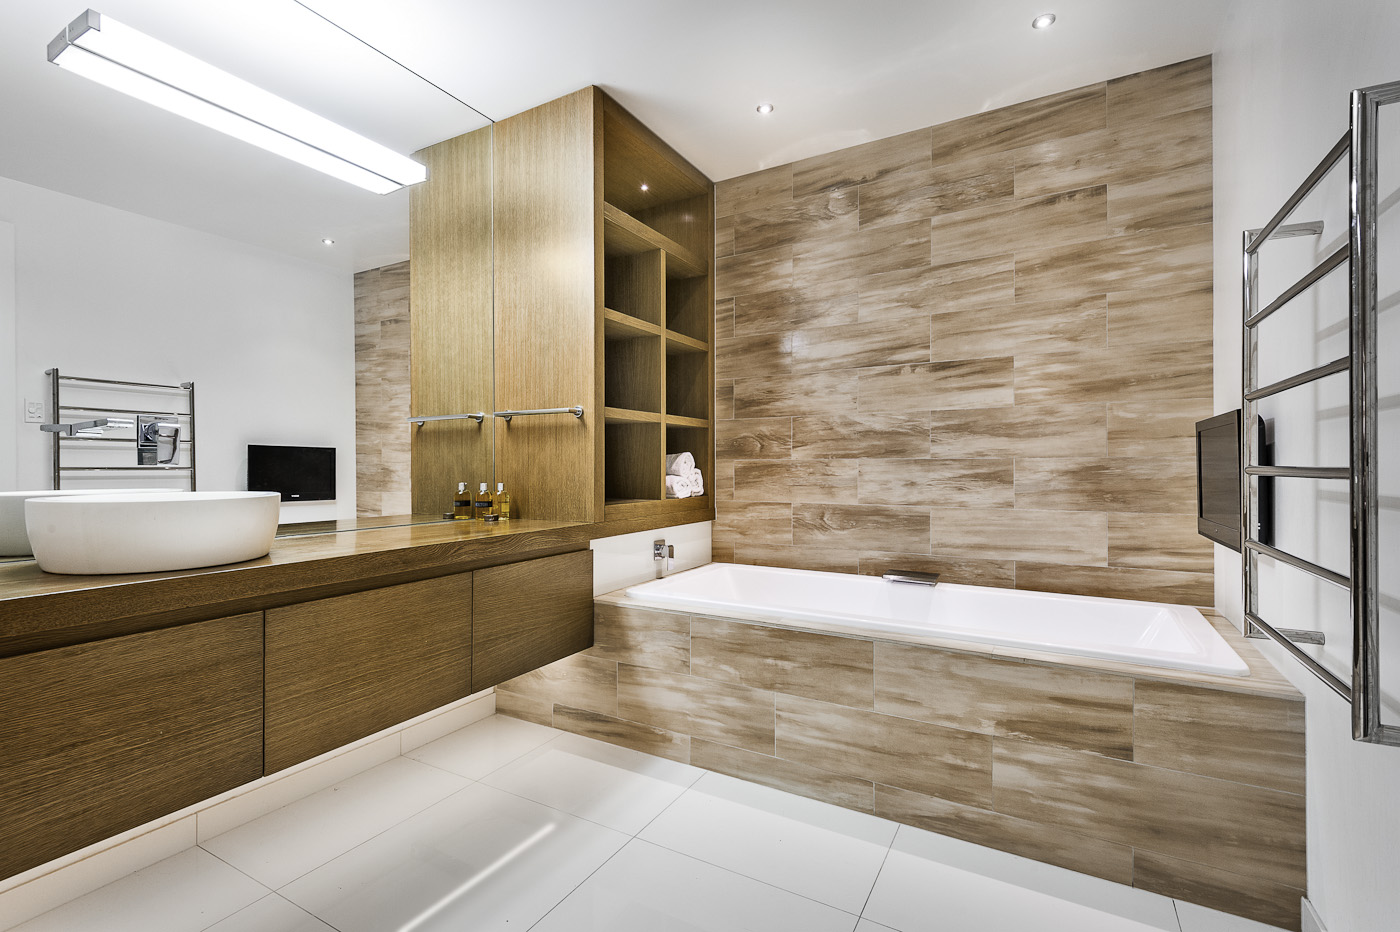 Tiled feature wall, precision joinery, Plank tiles, bathroom tile installation, Terranova Tiling services, tile installation in Christchurch, tiling industry expert, tile installation craftsman, Christchurch tile laying professional, installation of floor and wall tiles